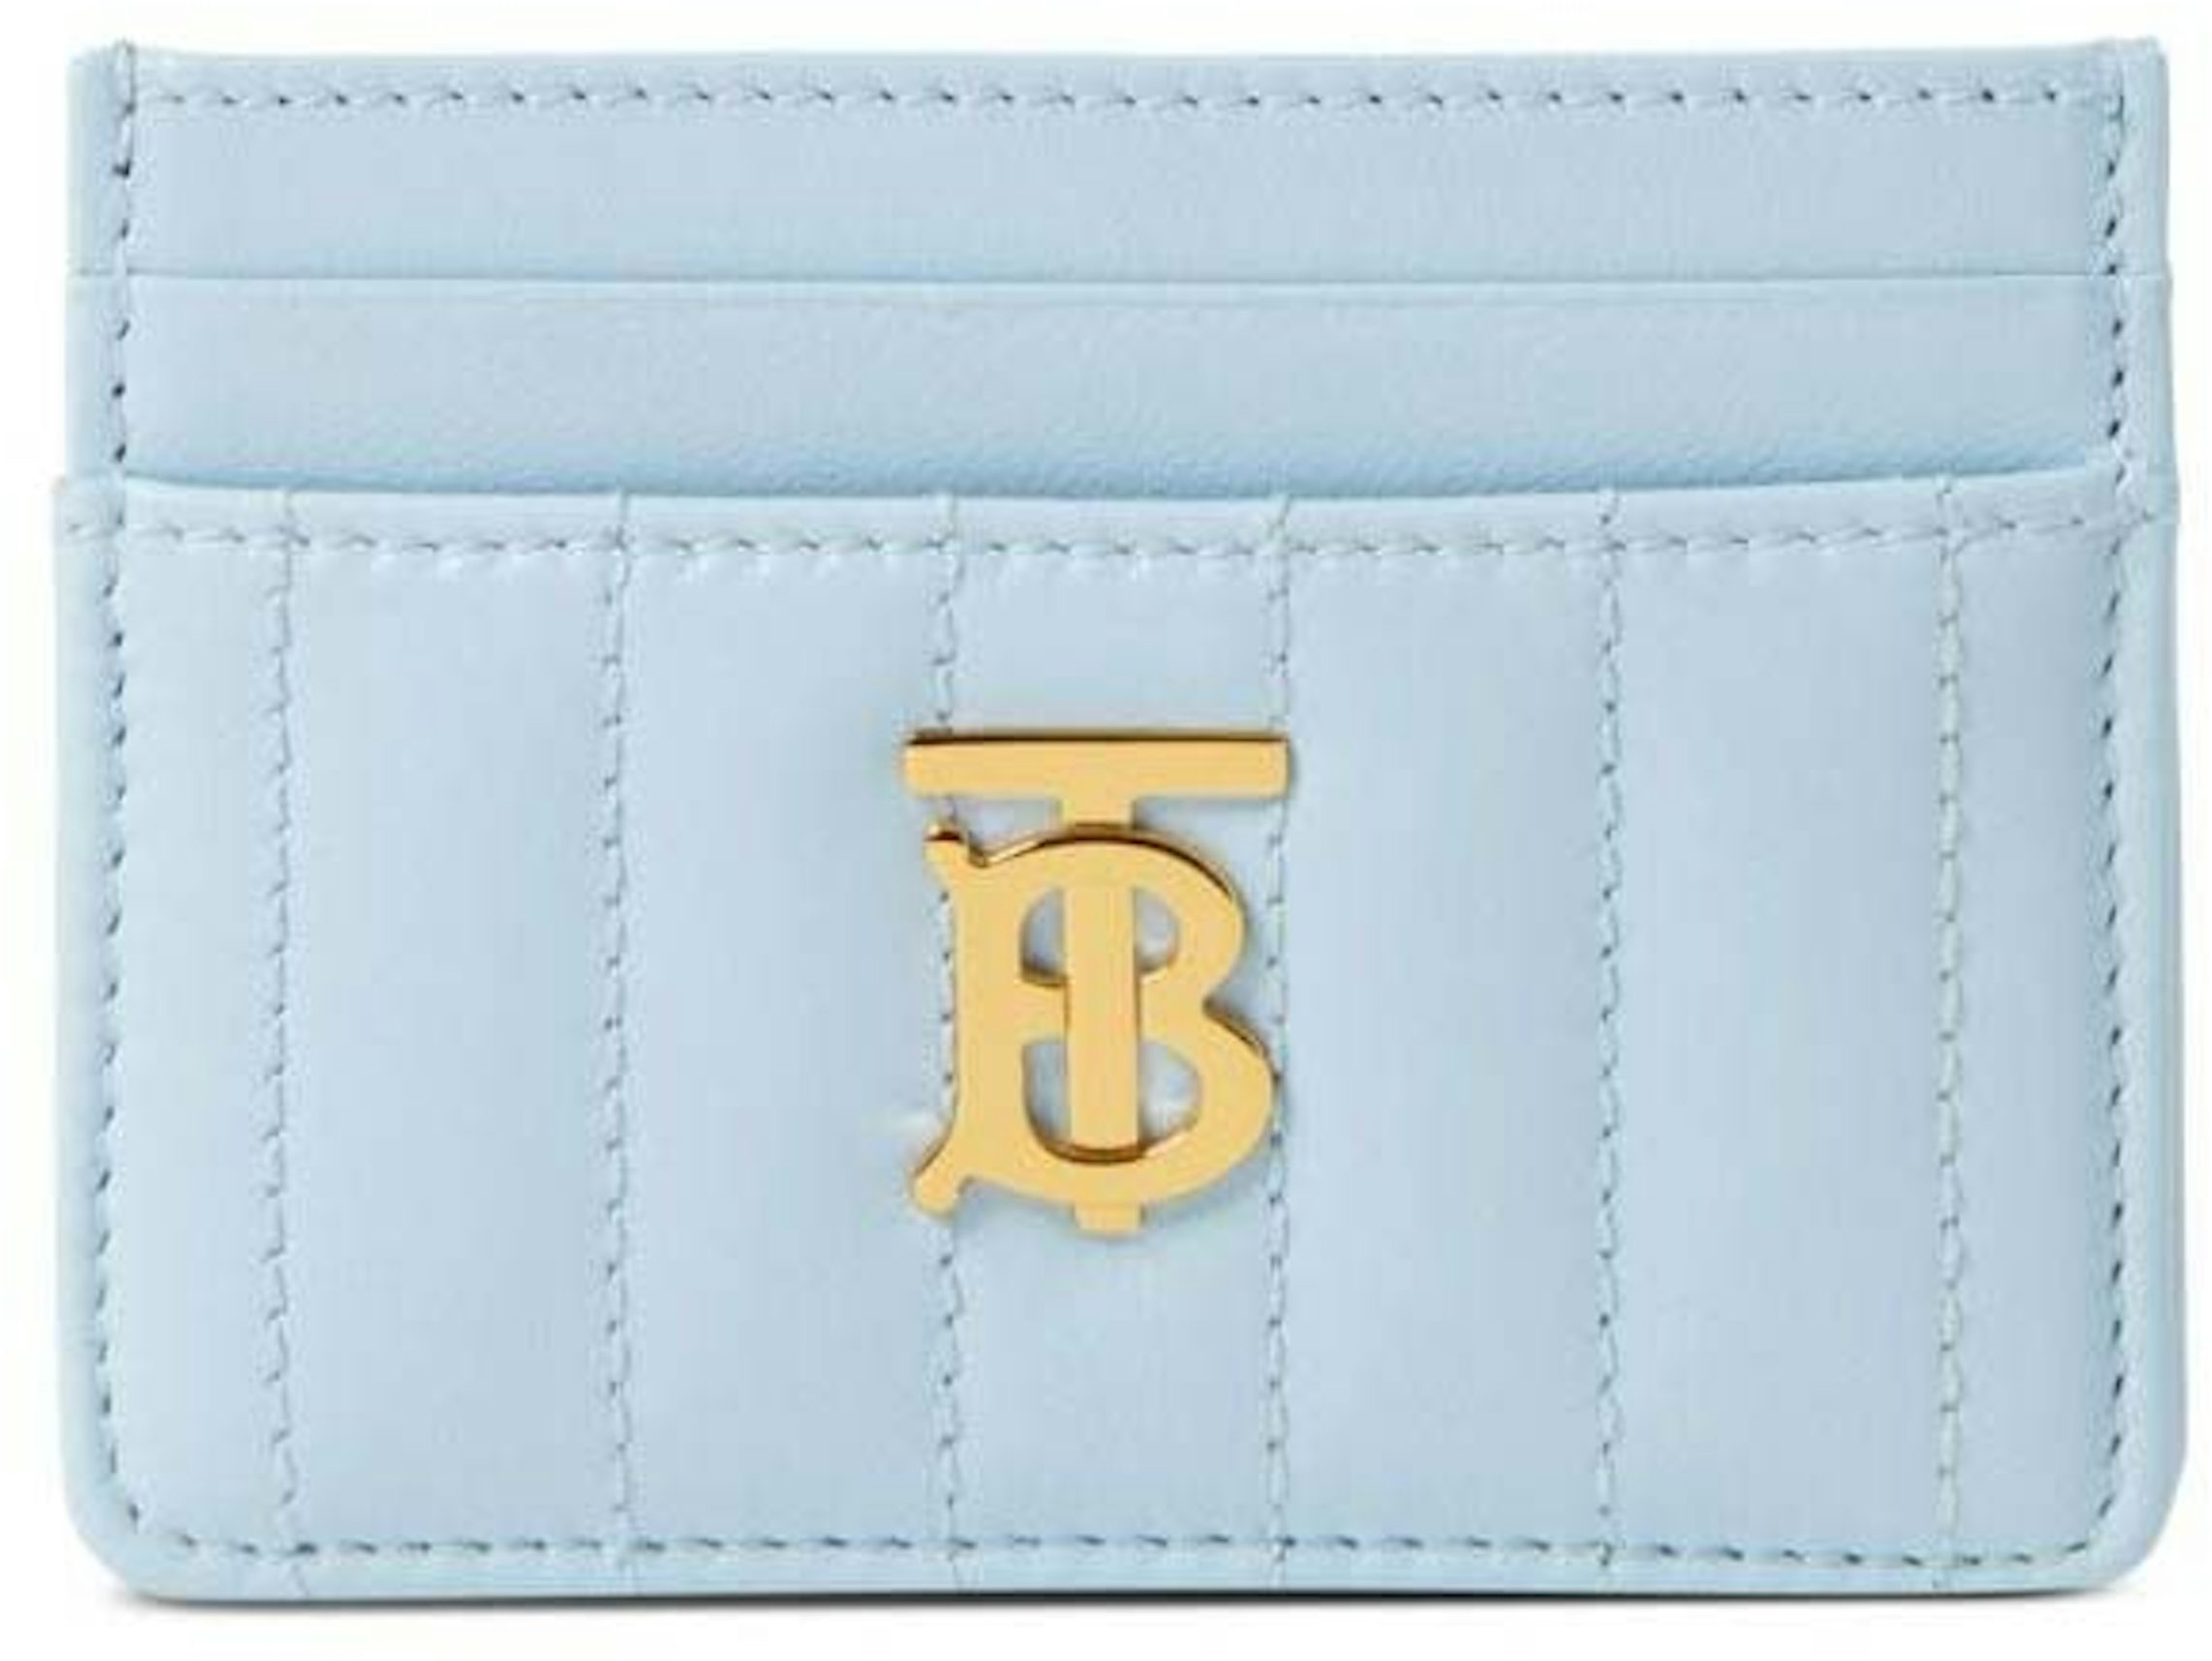 Burberry Quilted Lola Card Holder Grey